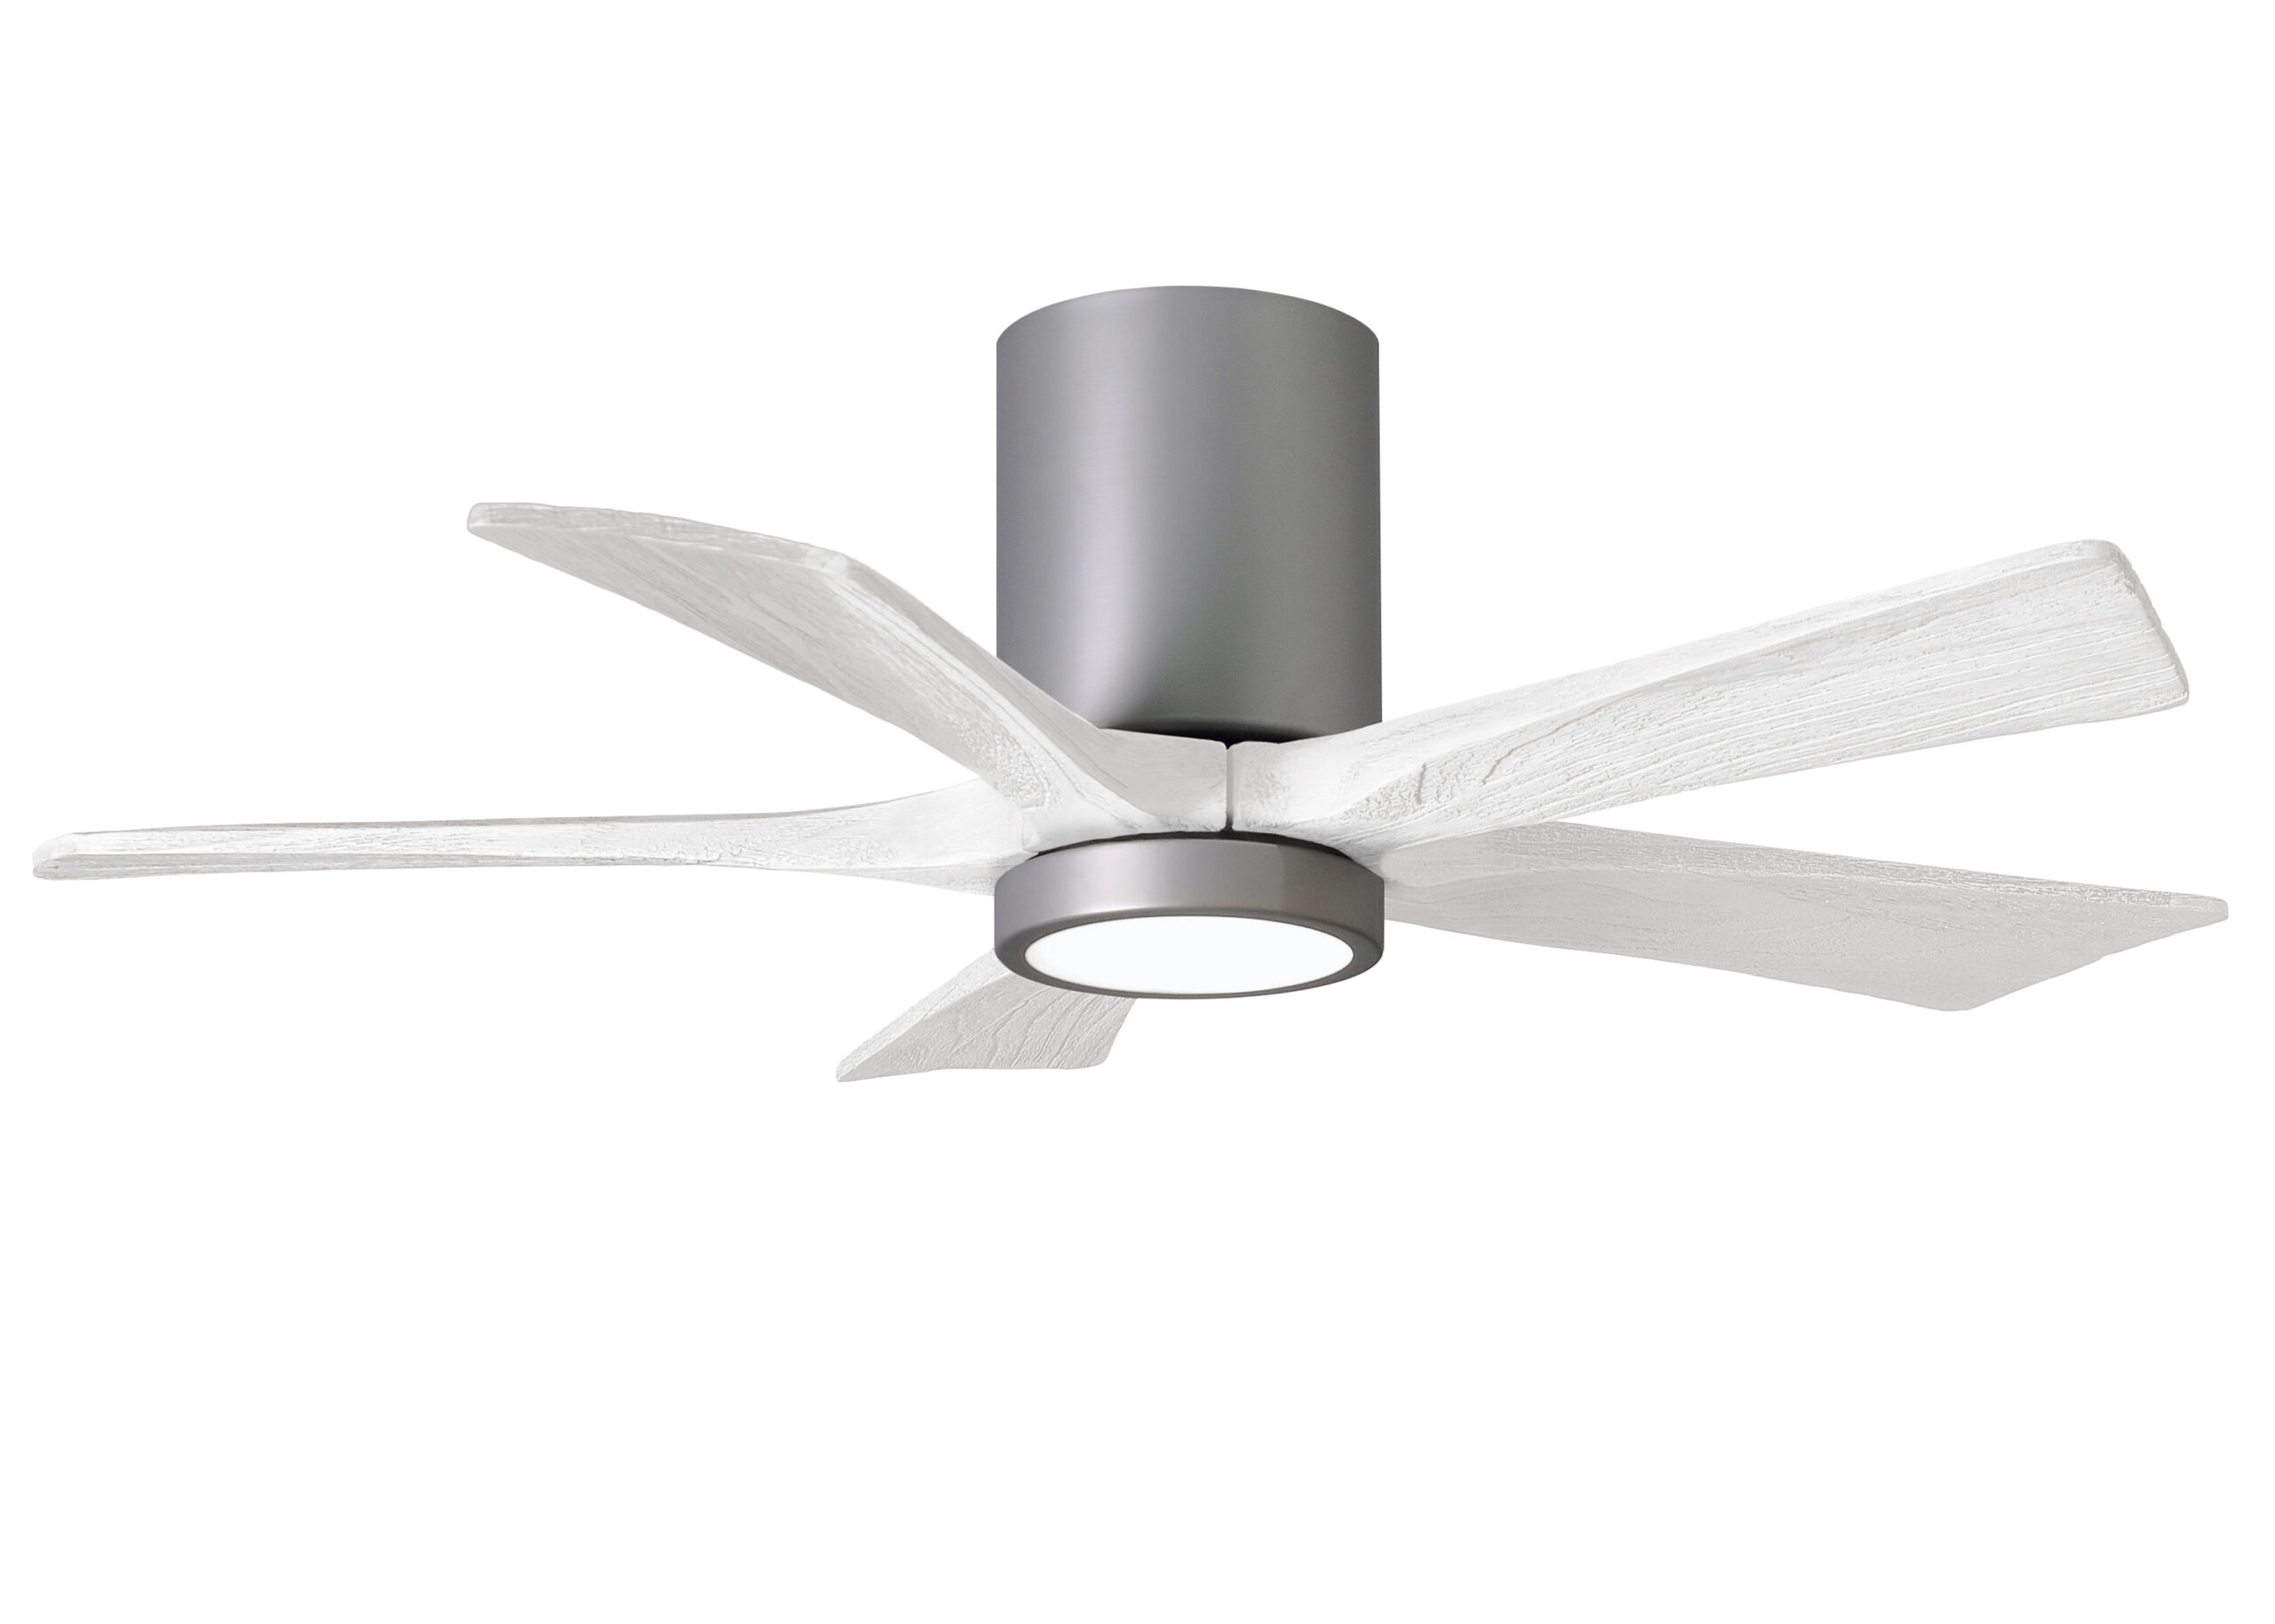 Irene-5HLK Ceiling Fan in Brushed Nickel Finish with 42